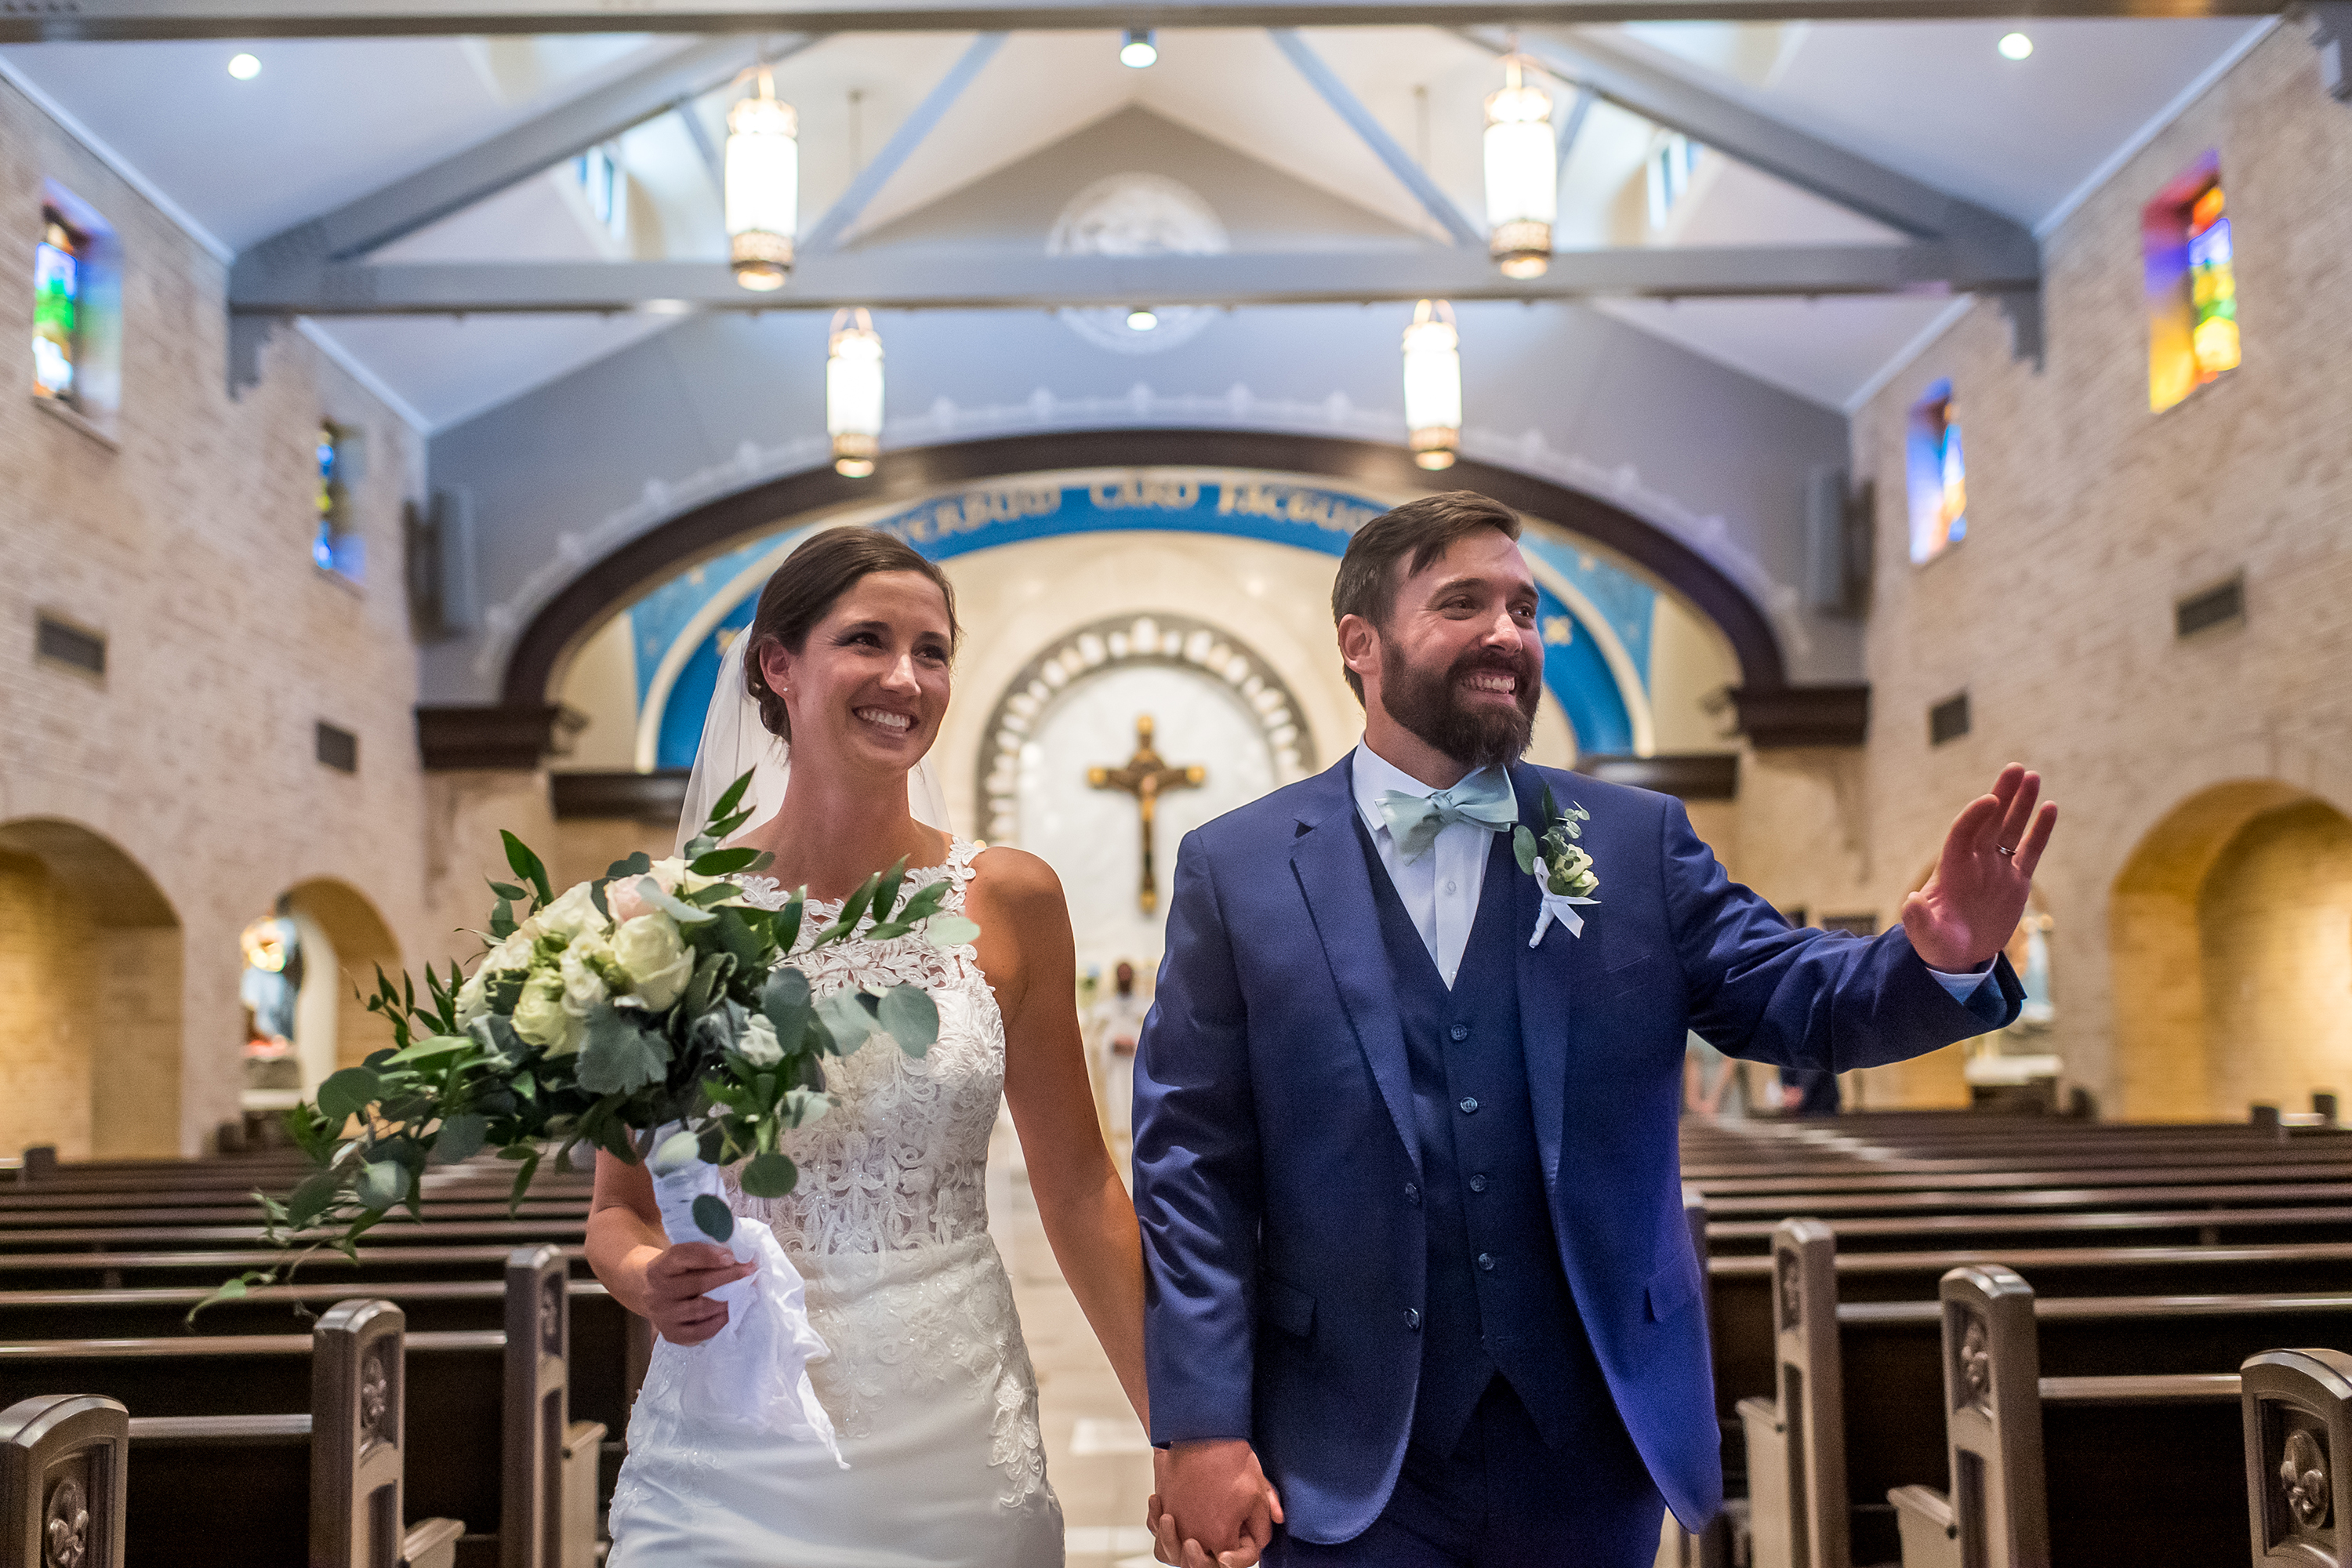 Bride and groom acknowledge friends at Our Lady of Lourdes Catholic Church in Denver, Colorado, after their wedding